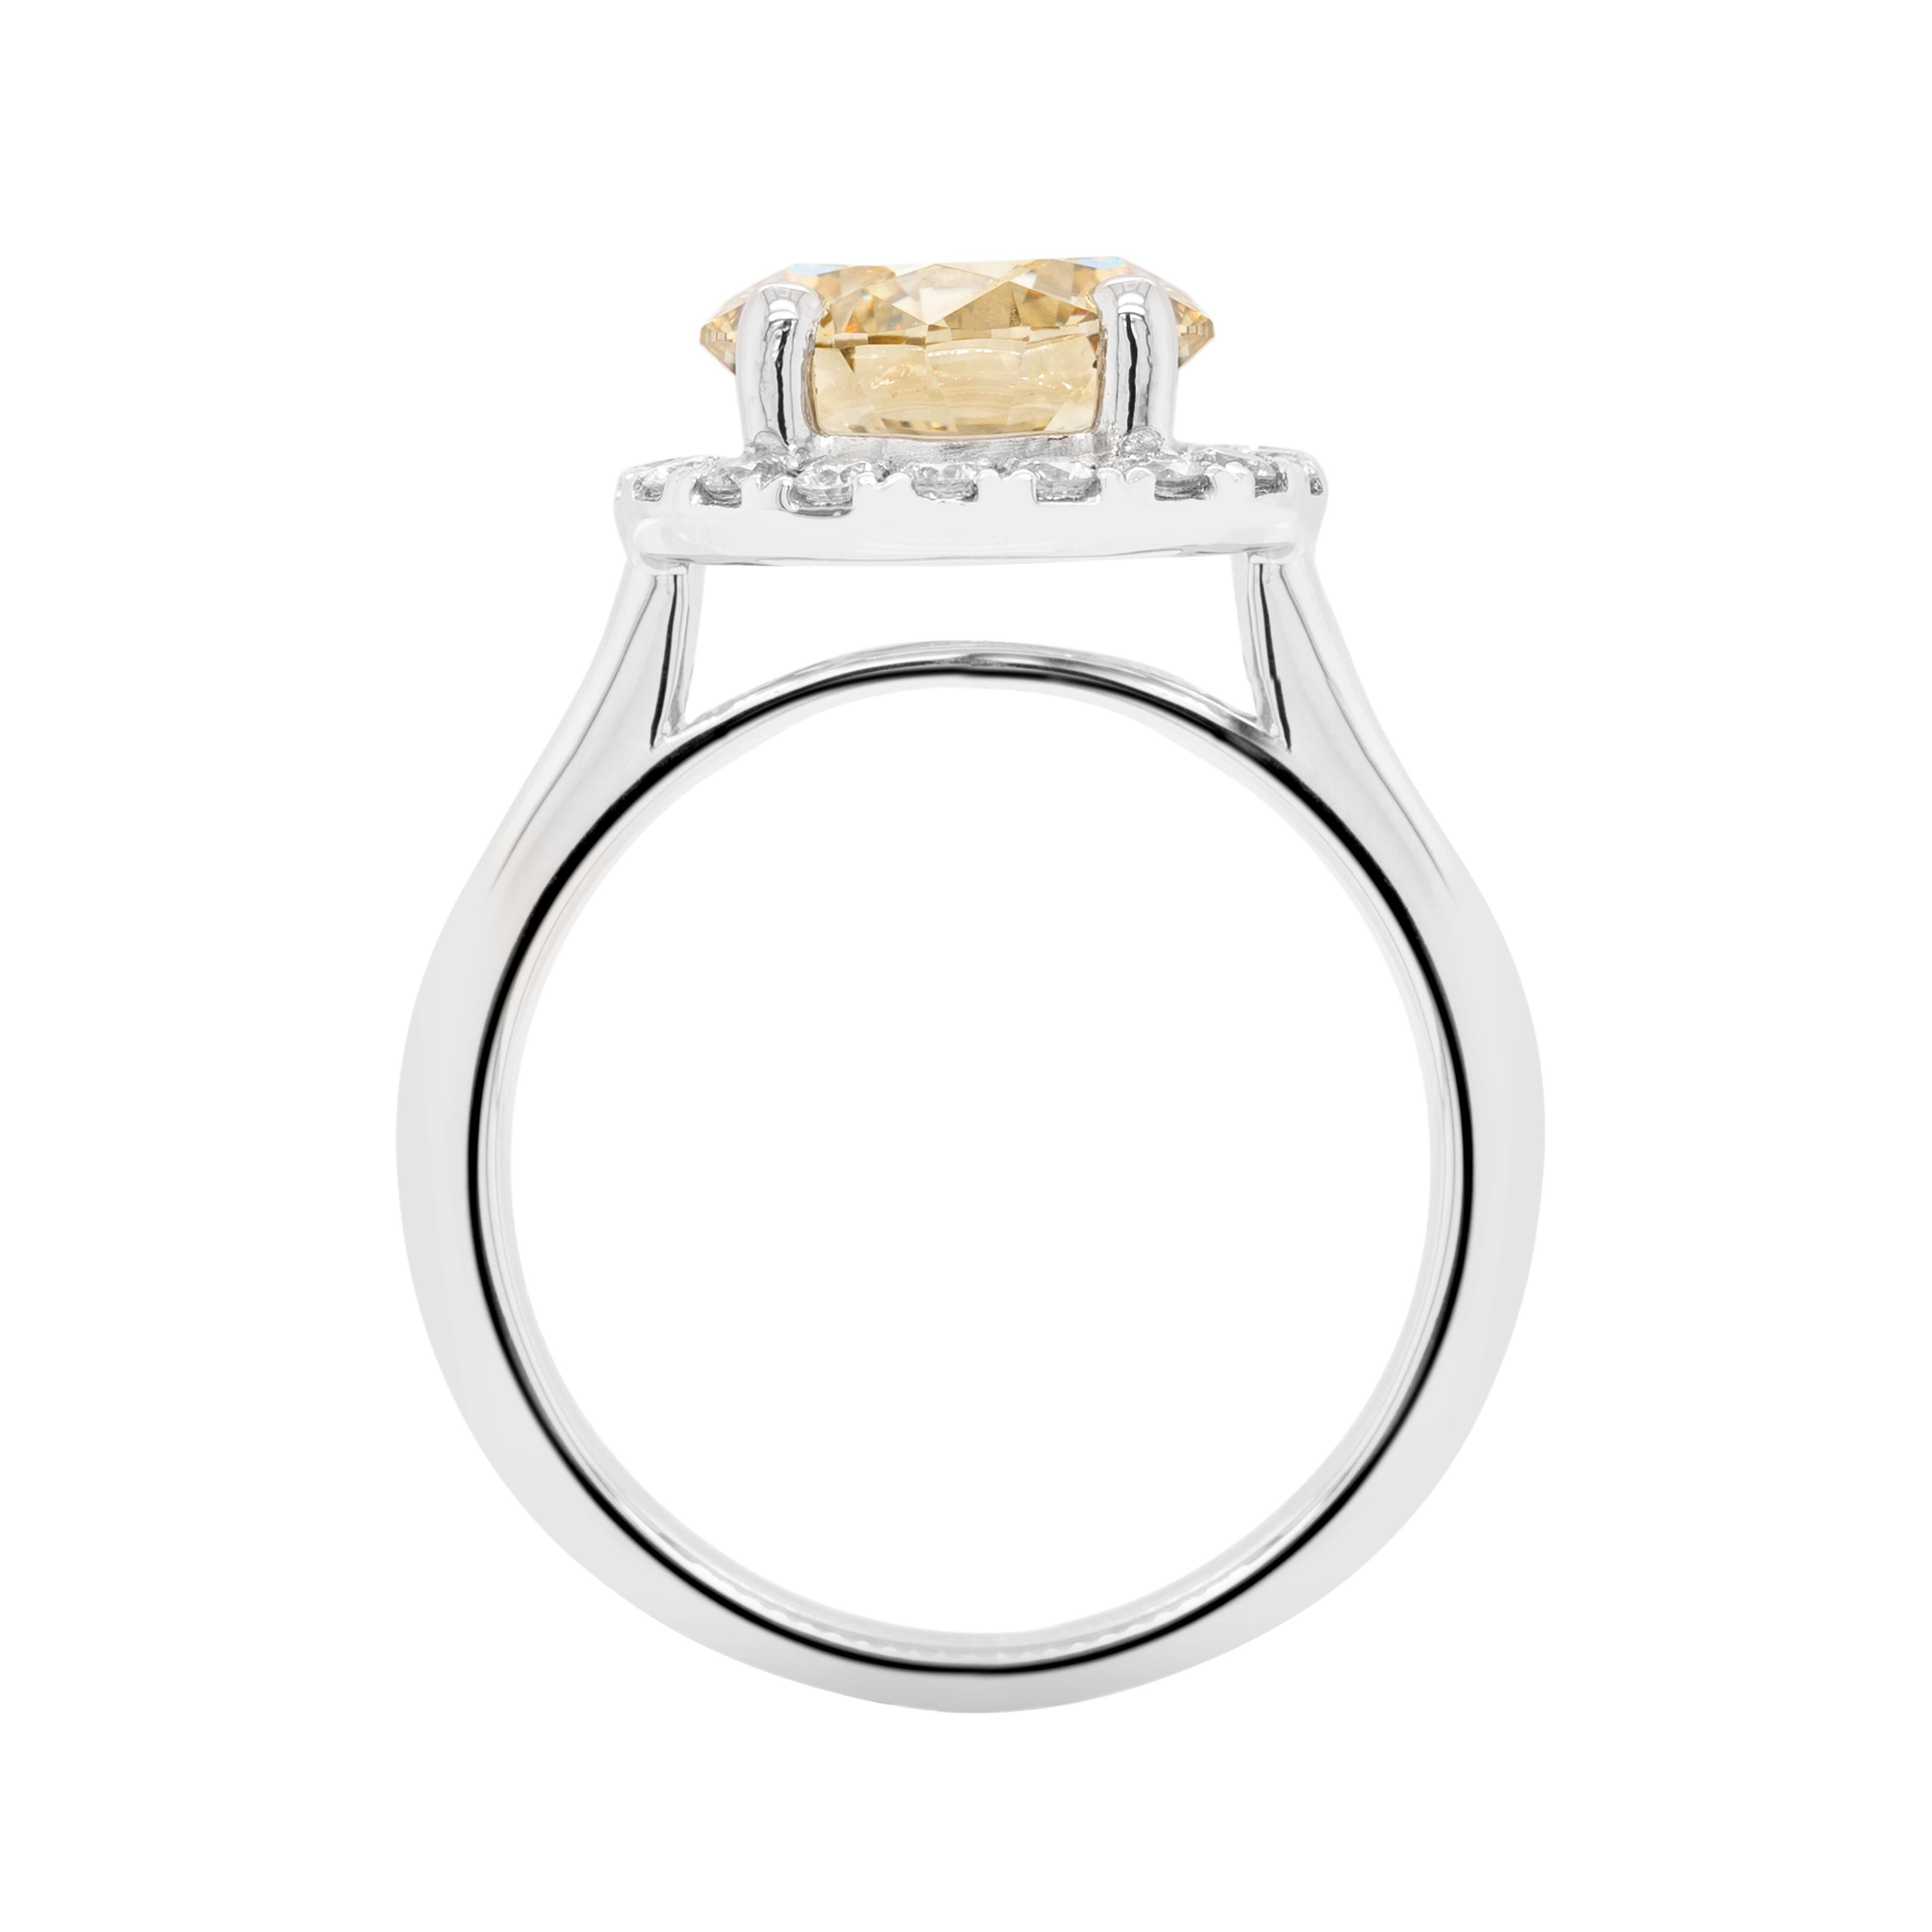 This stunning engagement ring features an impressive round brilliant cut fancy champagne colour diamond weighing 2.46ct, mounted in a four claw, open back setting. The wonderful stone is surrounded by a halo of 18 fine quality round brilliant cut